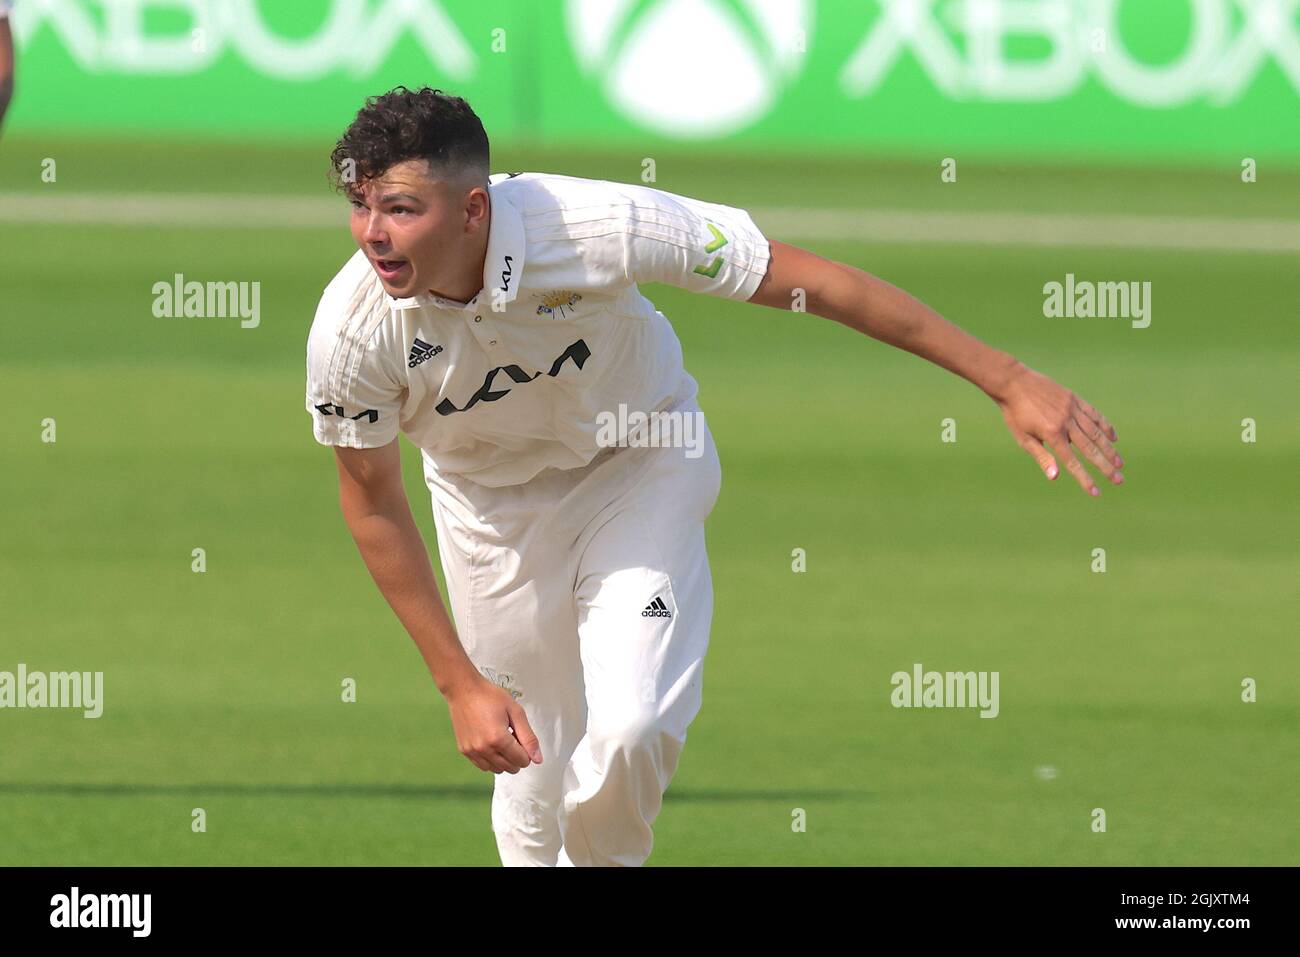 12 September, 2021. London, UK. Surrey’s James Taylor bowling as Surrey take on Essex in the County Championship at the Kia Oval, day one. David Rowe/Alamy Live News. Stock Photo